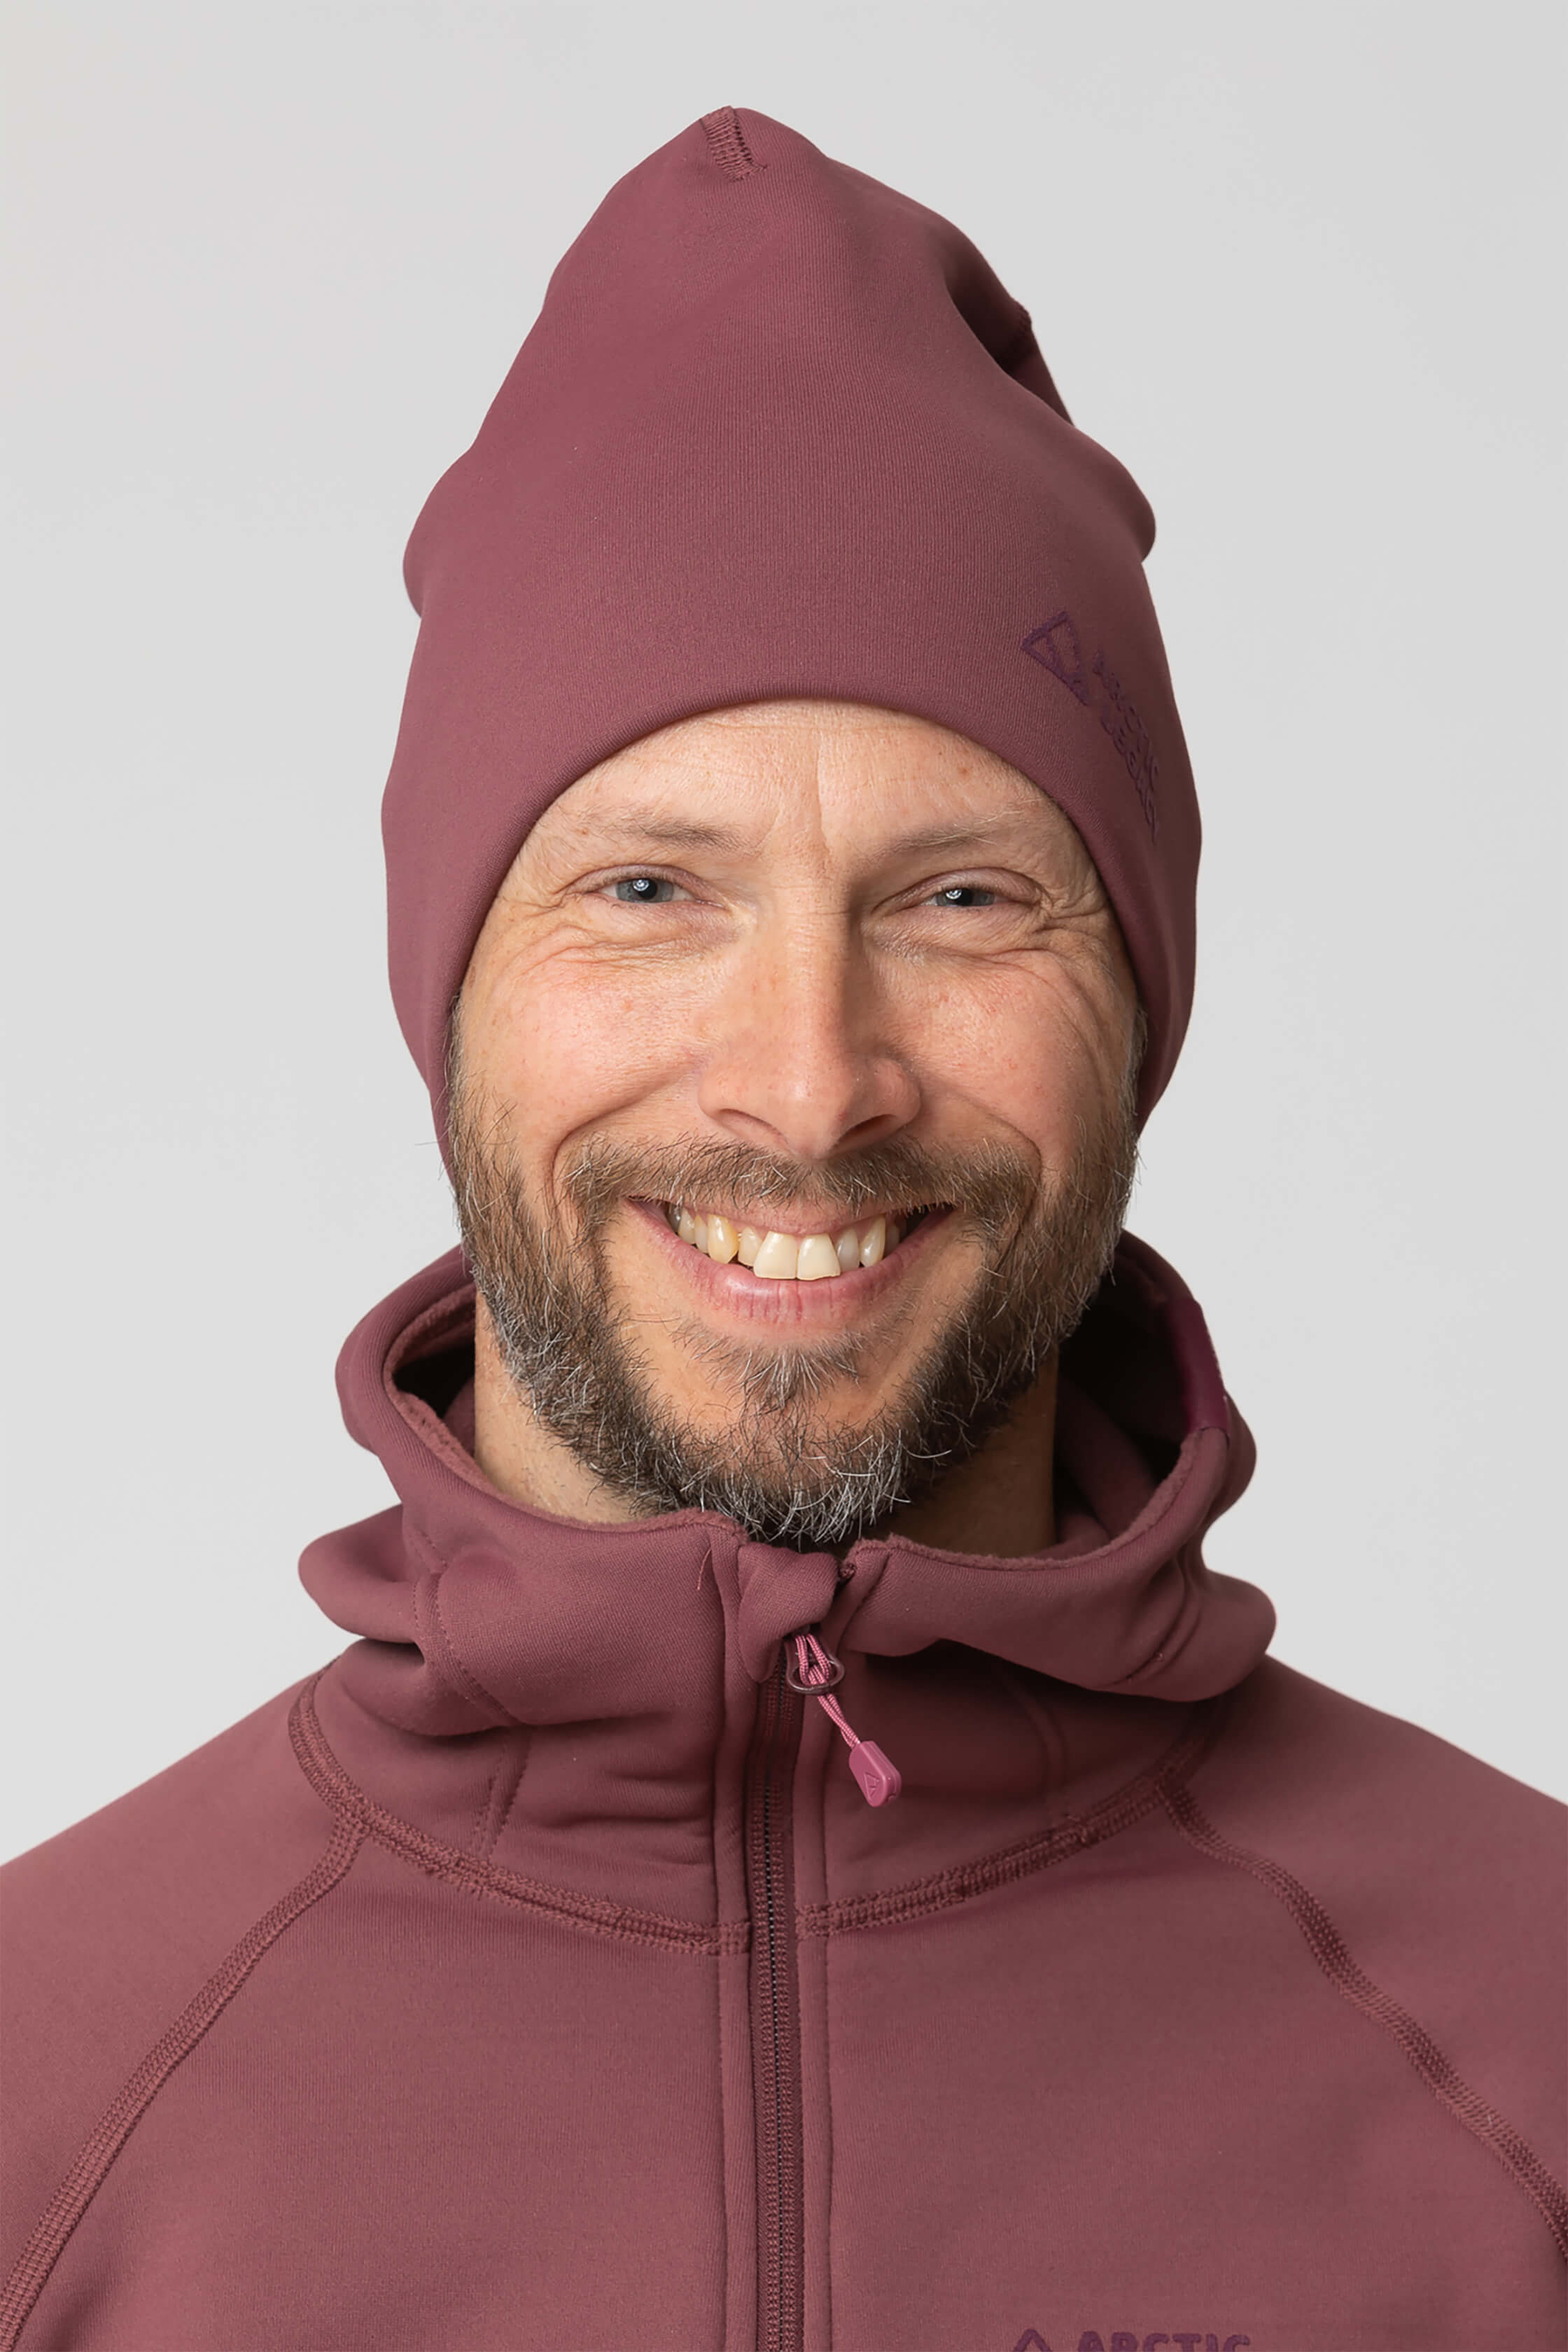 Purple fleece hat - front view of the Arctic Legacy Nova Dual Layer Beanie#color_crushed-berry